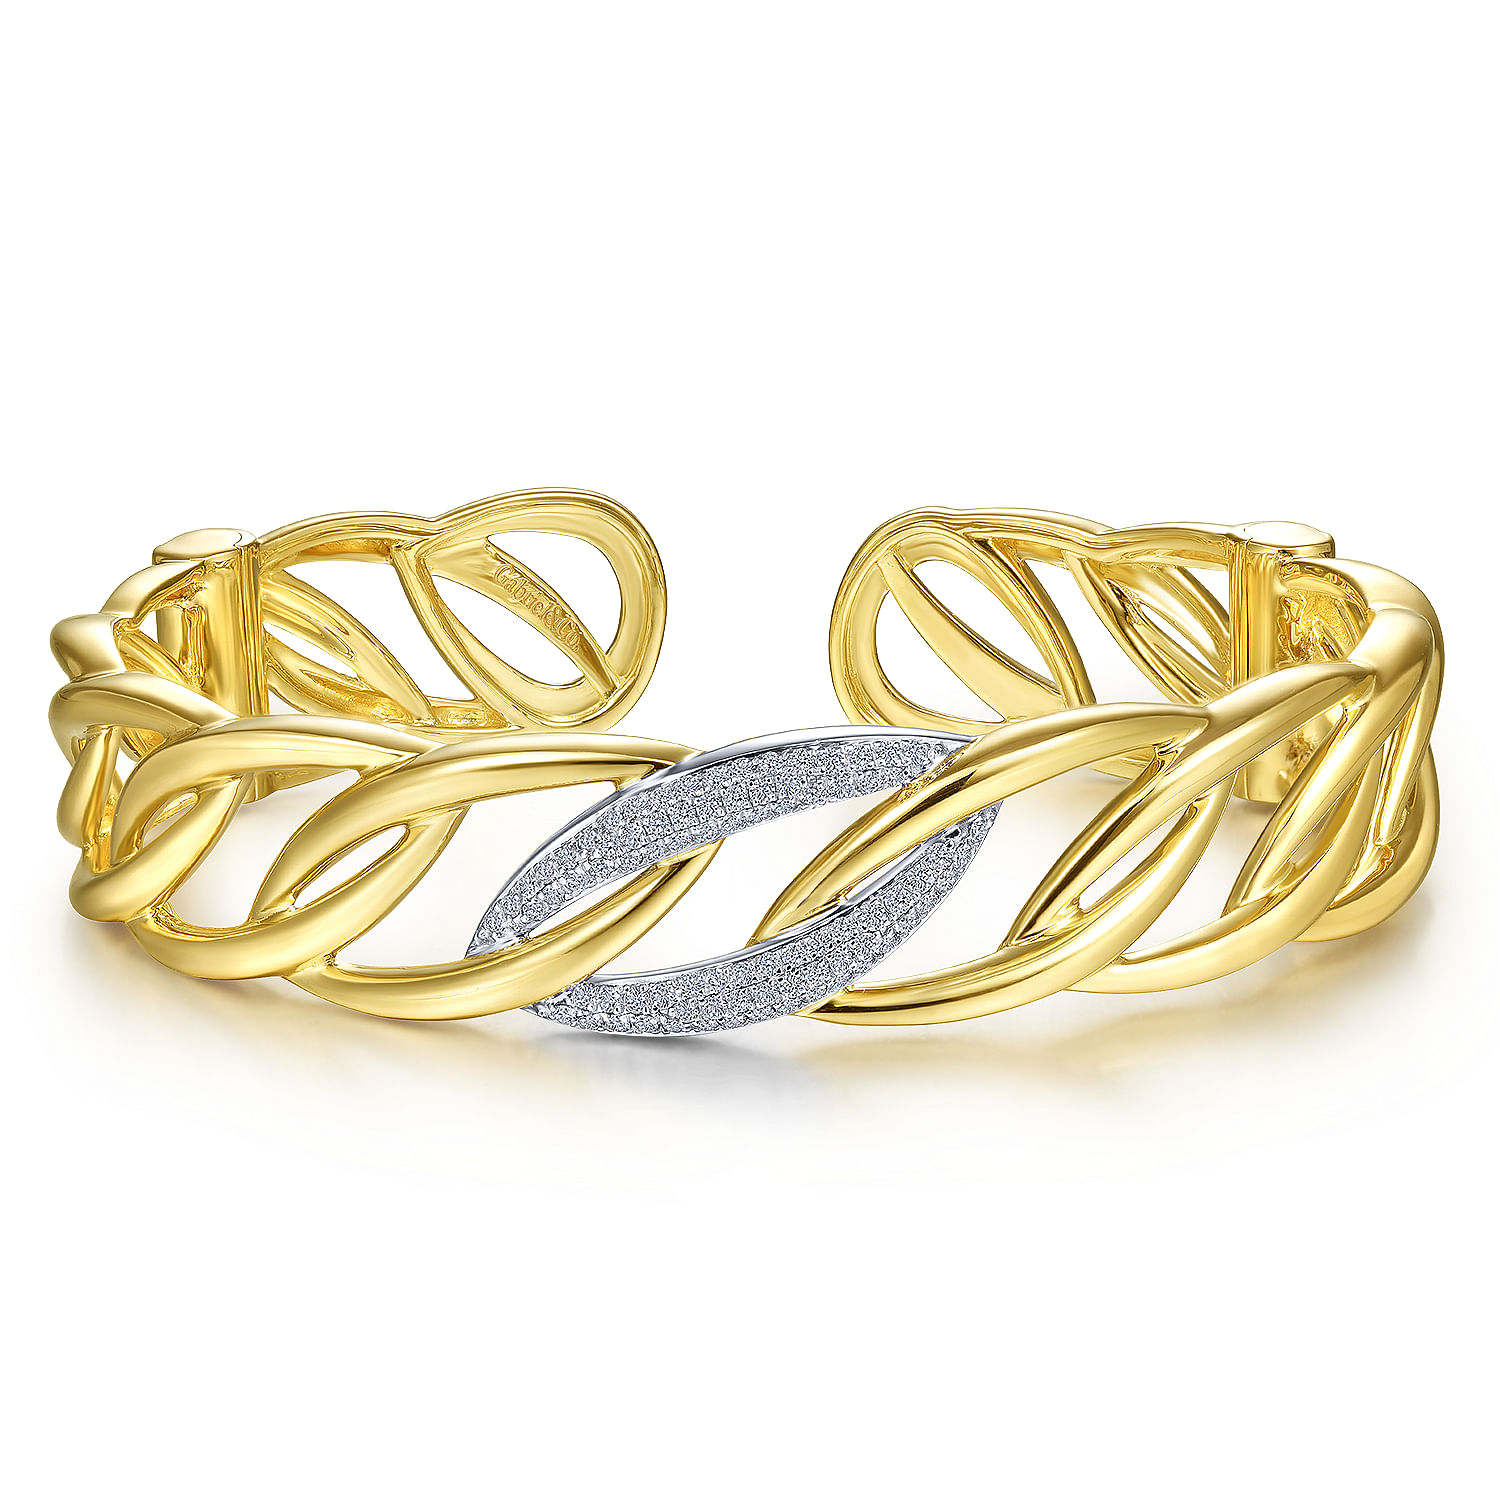 14K Yellow Gold Chain Link Cuff Bracelet with White Gold Pavé Diamond Station